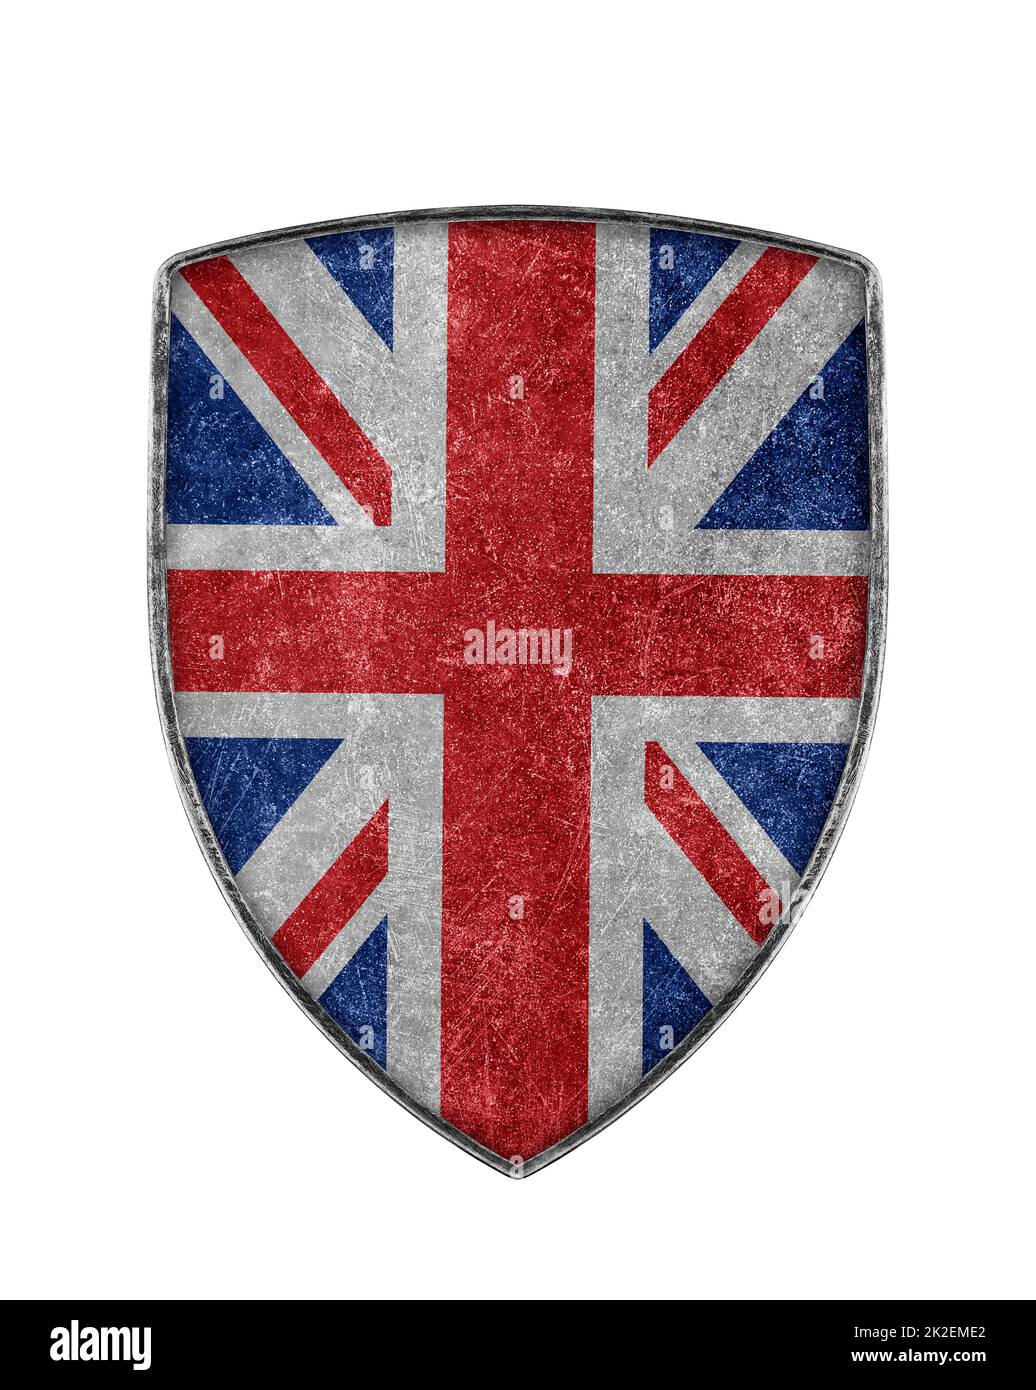 Great Britain flag on metal shield isolated on white background Stock Photo